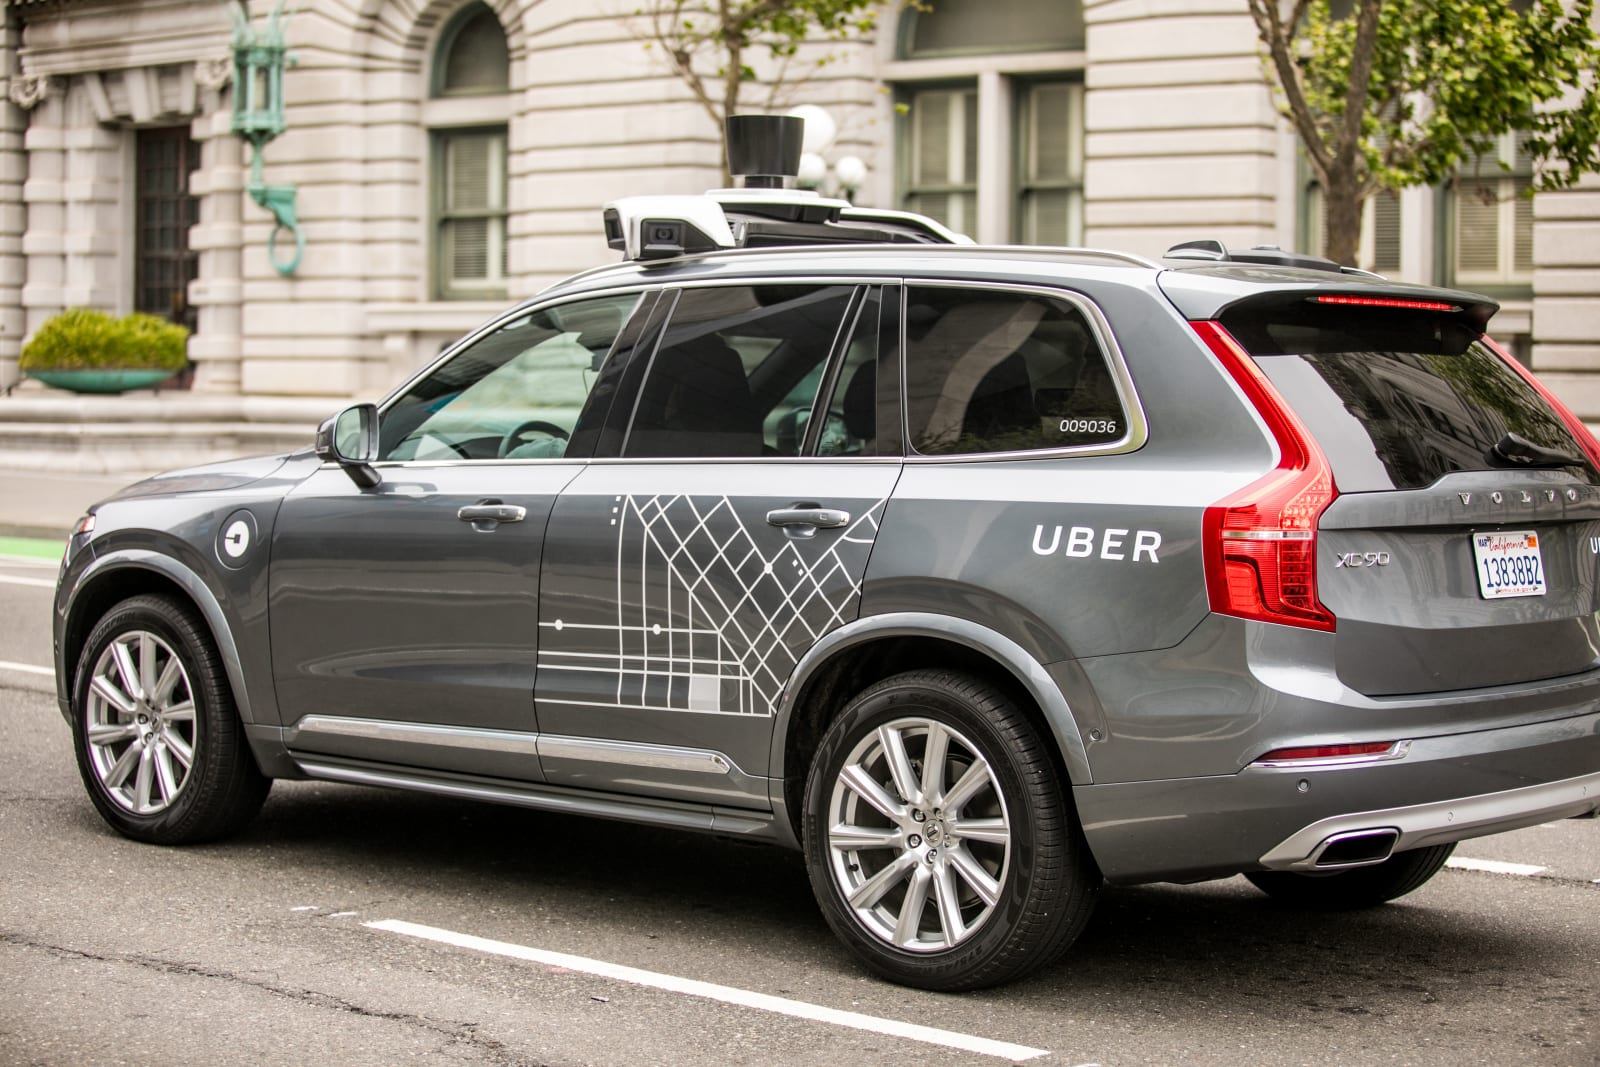 San Francisco, California, USA - May 16, 2017: An Uber self-driving Volvo XC90 SUV on 7th street and Market part of Uber's testi